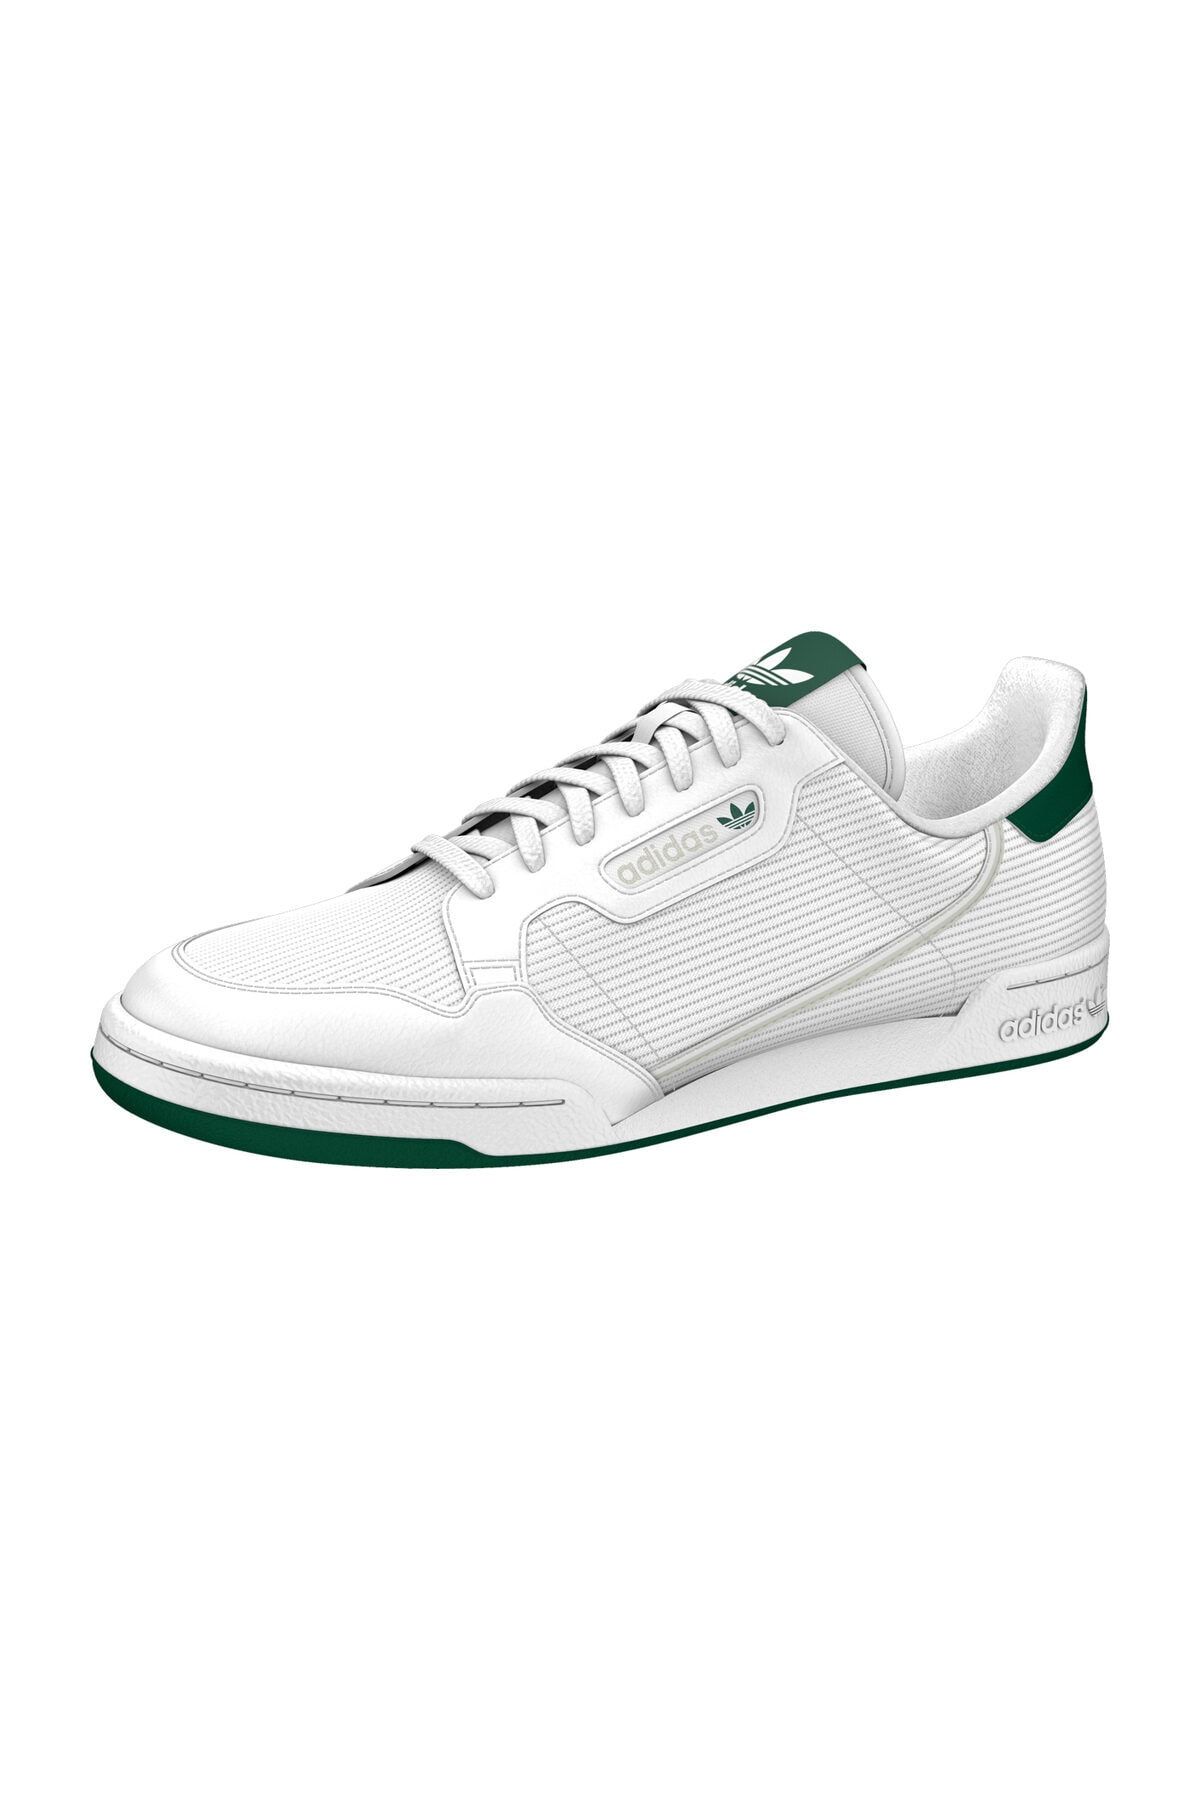 adidas CONTINENTAL Sneaker 80      FTWWHT/GREONE/CGREEN